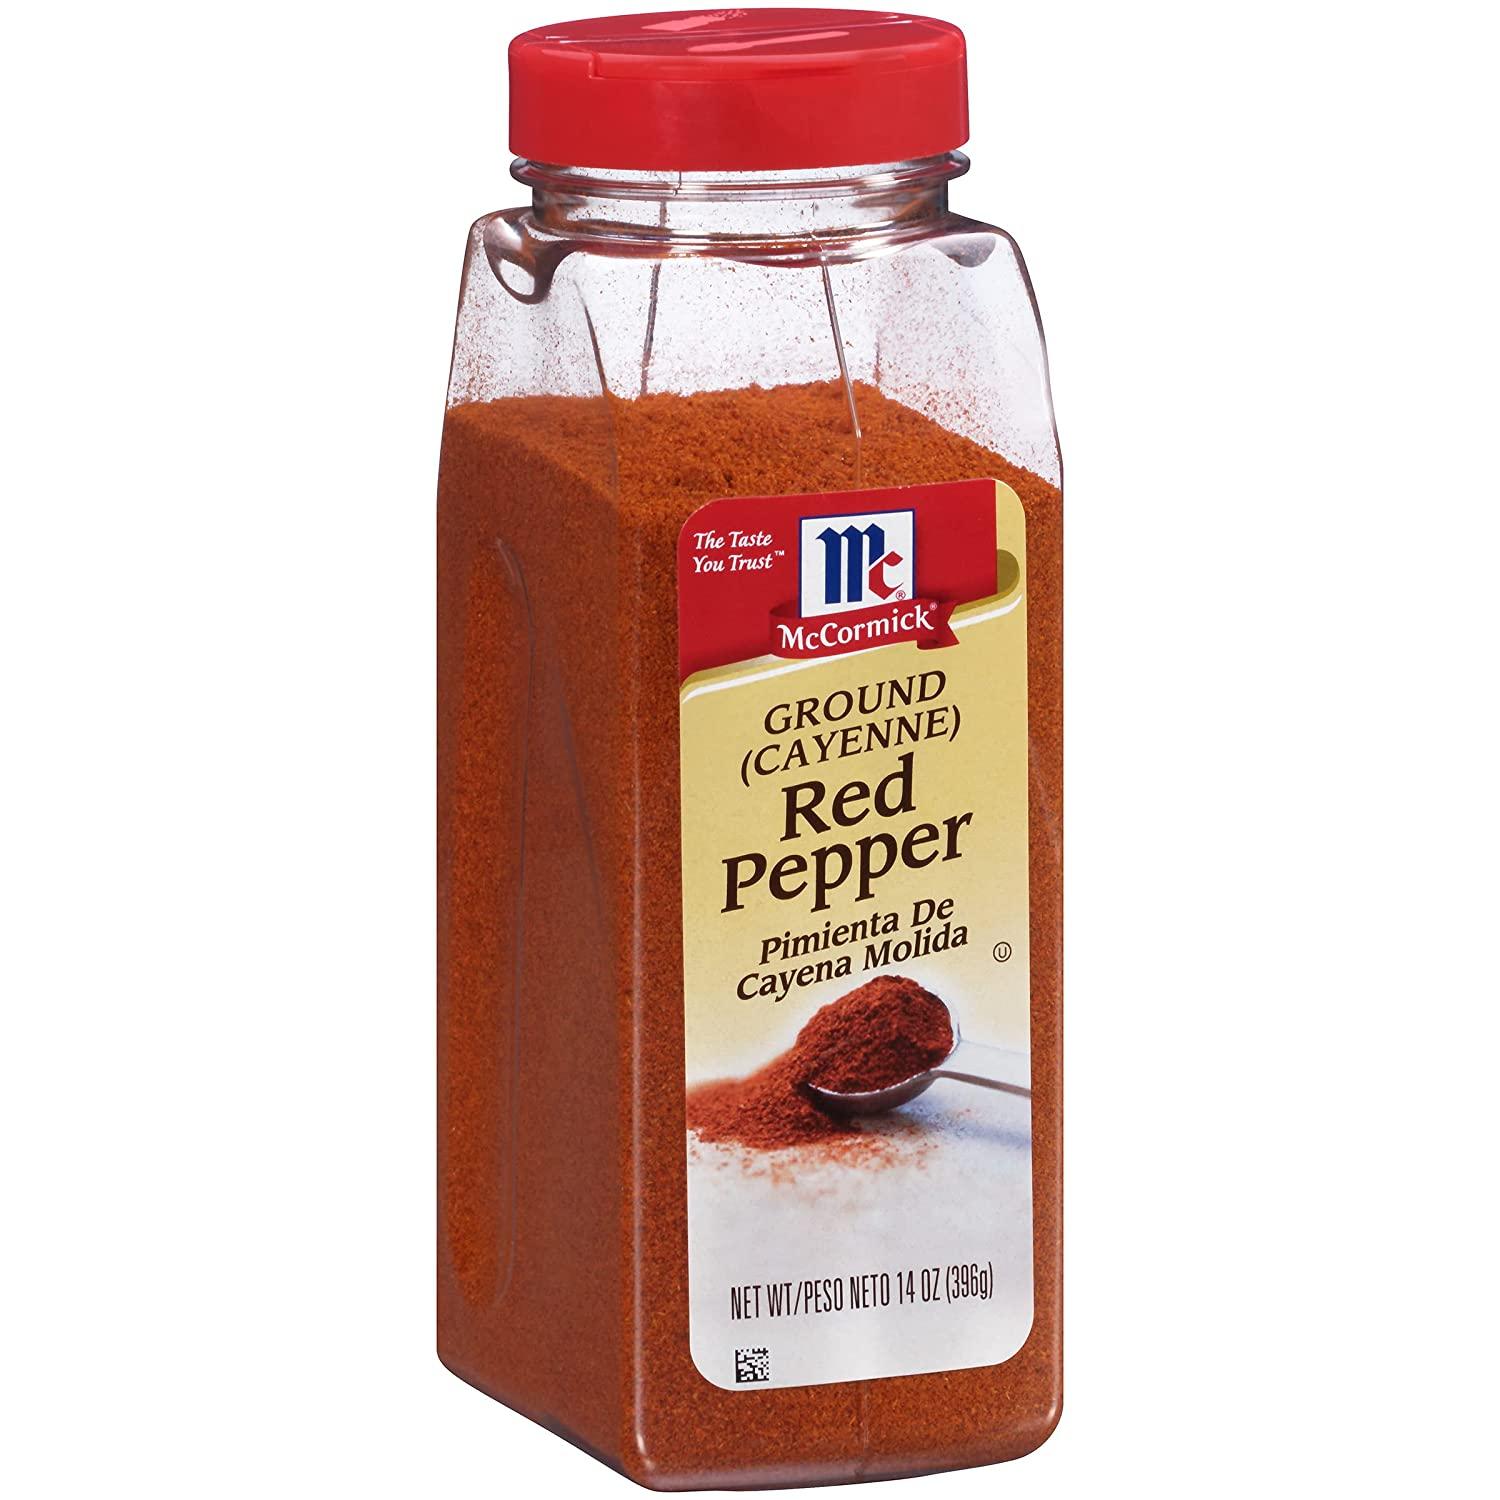 McCormick Ground Cayenne Red Pepper for $5.03 Shipped